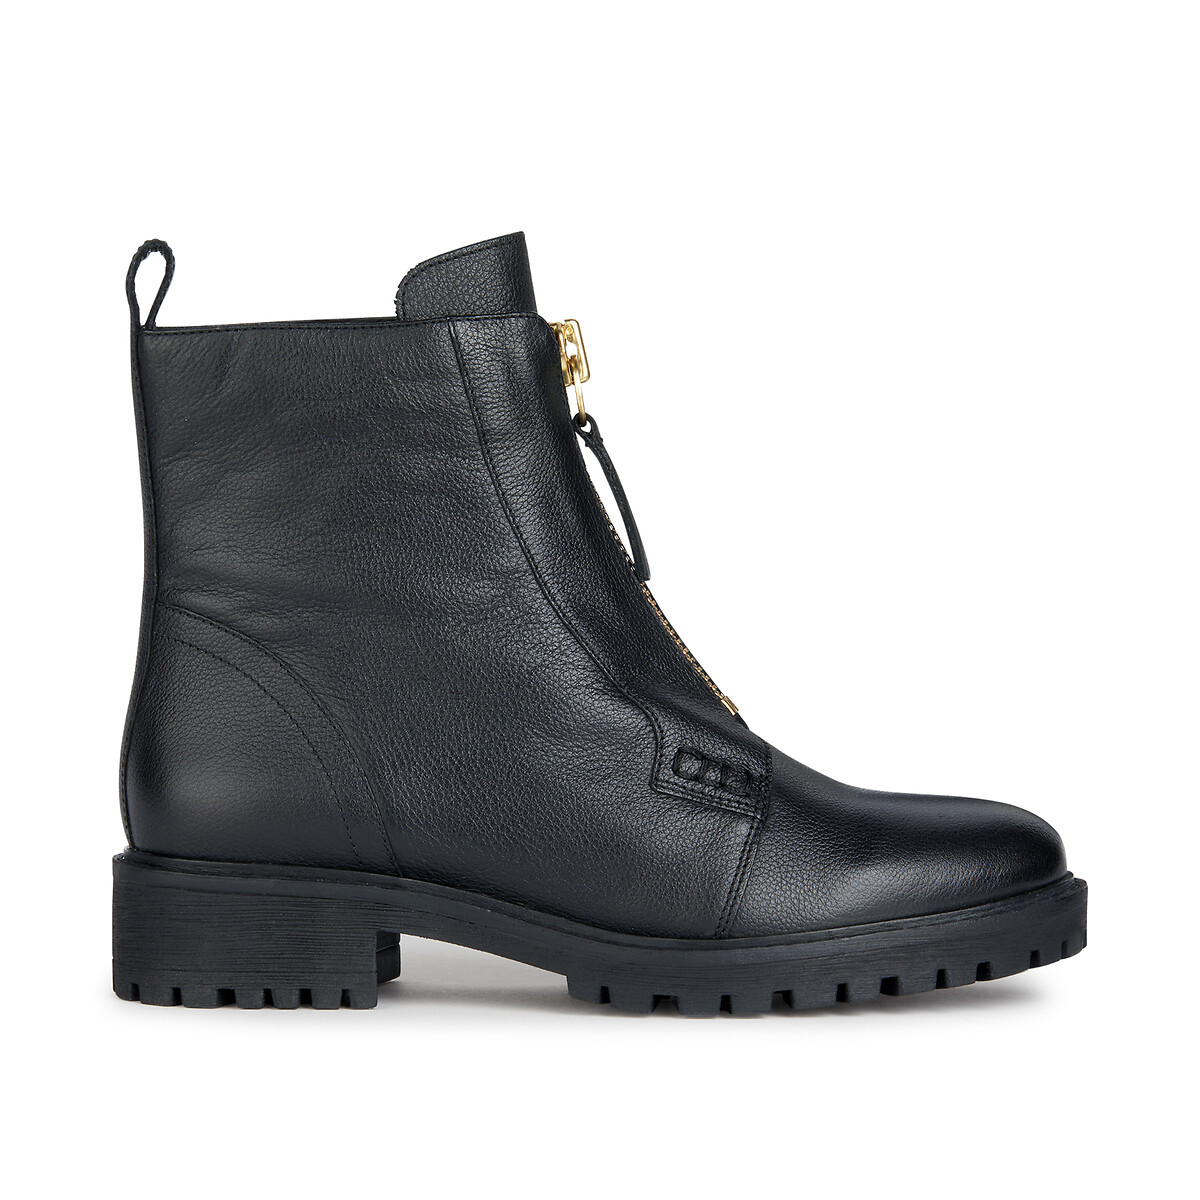 hoara zipped ankle boots in breathable leather